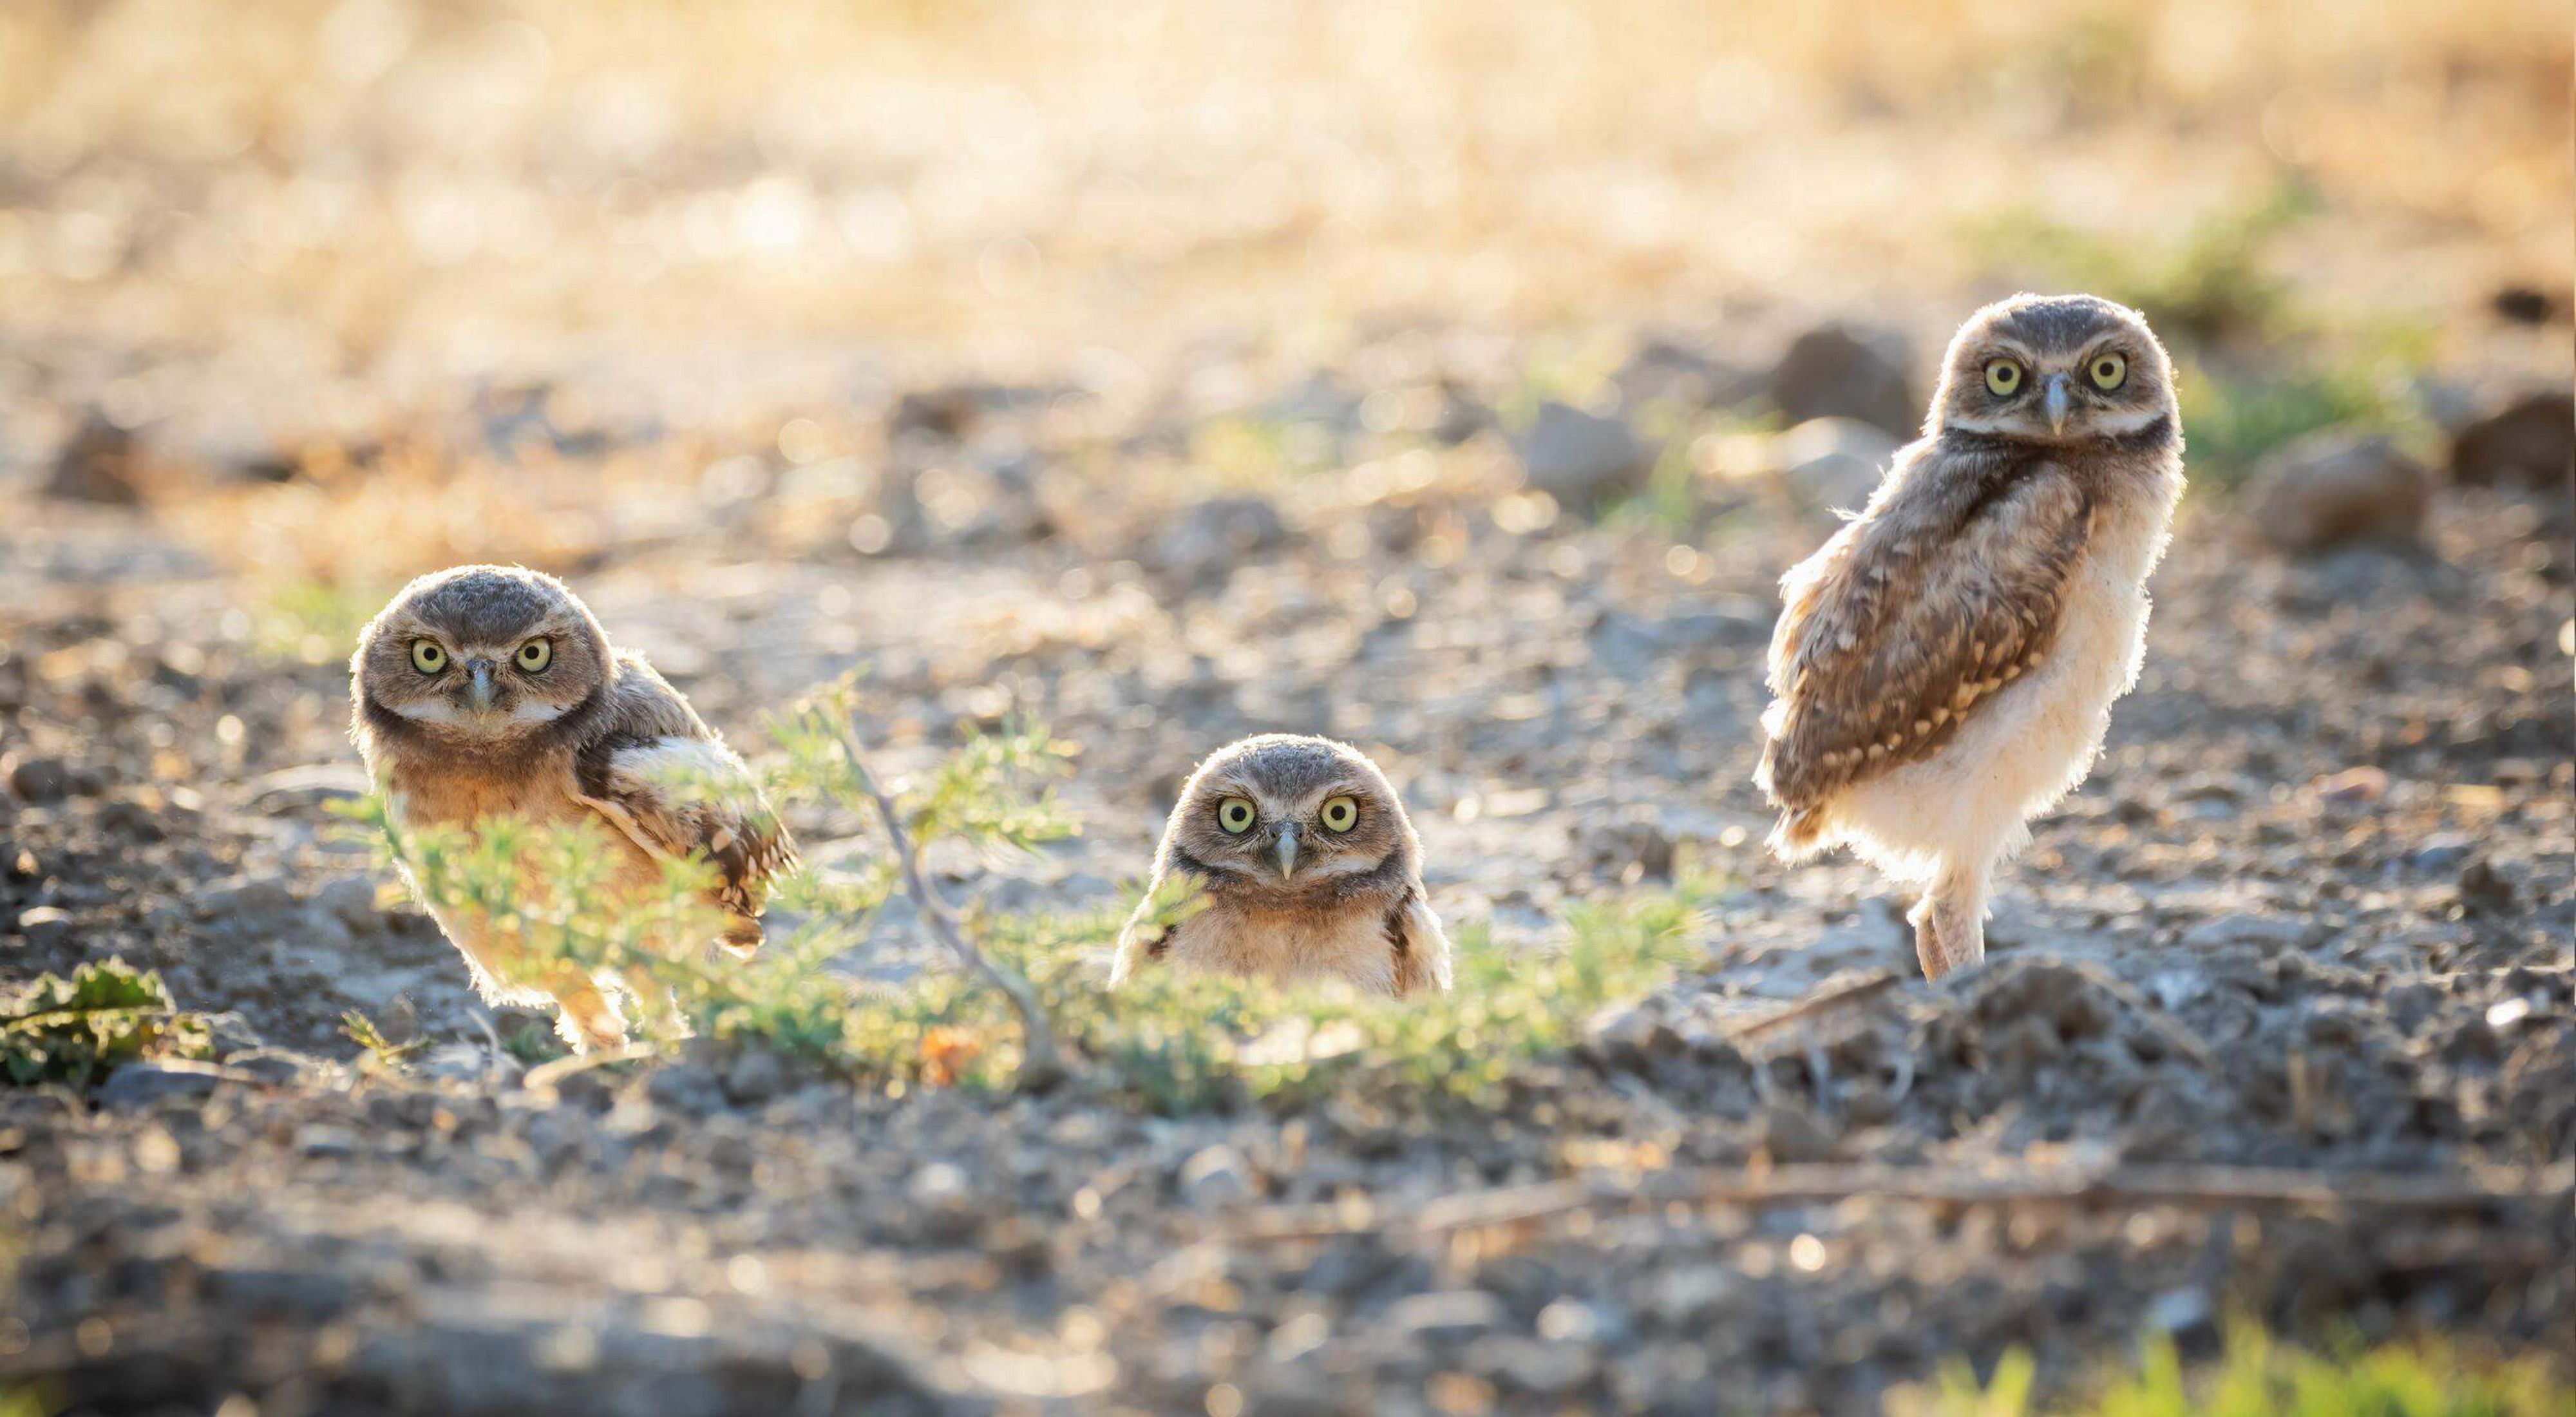 Three burrowing owls stand on the ground, facing the camera.